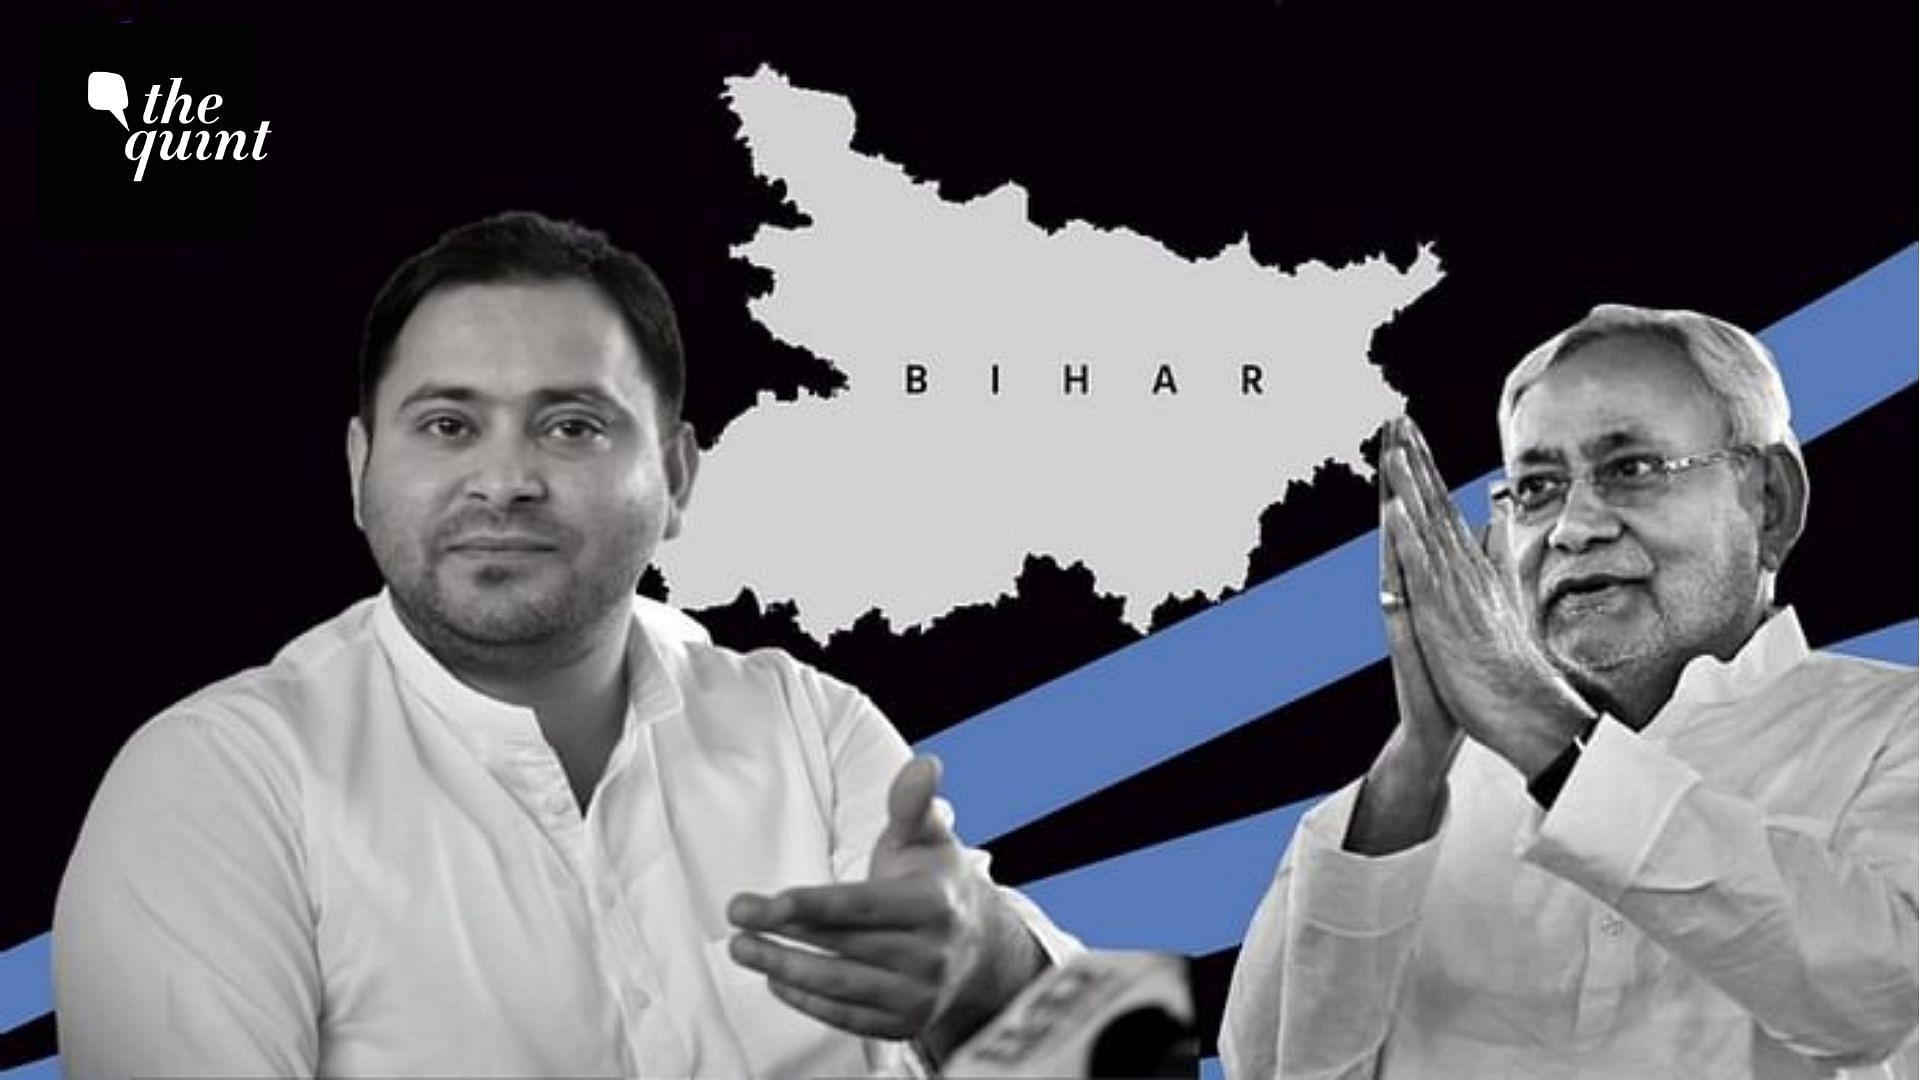 The Times Now-CVoter Opinion Poll, released on Saturday, 24 October, ahead of the Bihar Assembly elections, has indicated that majority of people are not satisfied with the performance of the government led by Bihar Chief Minister Nitish Kumar.